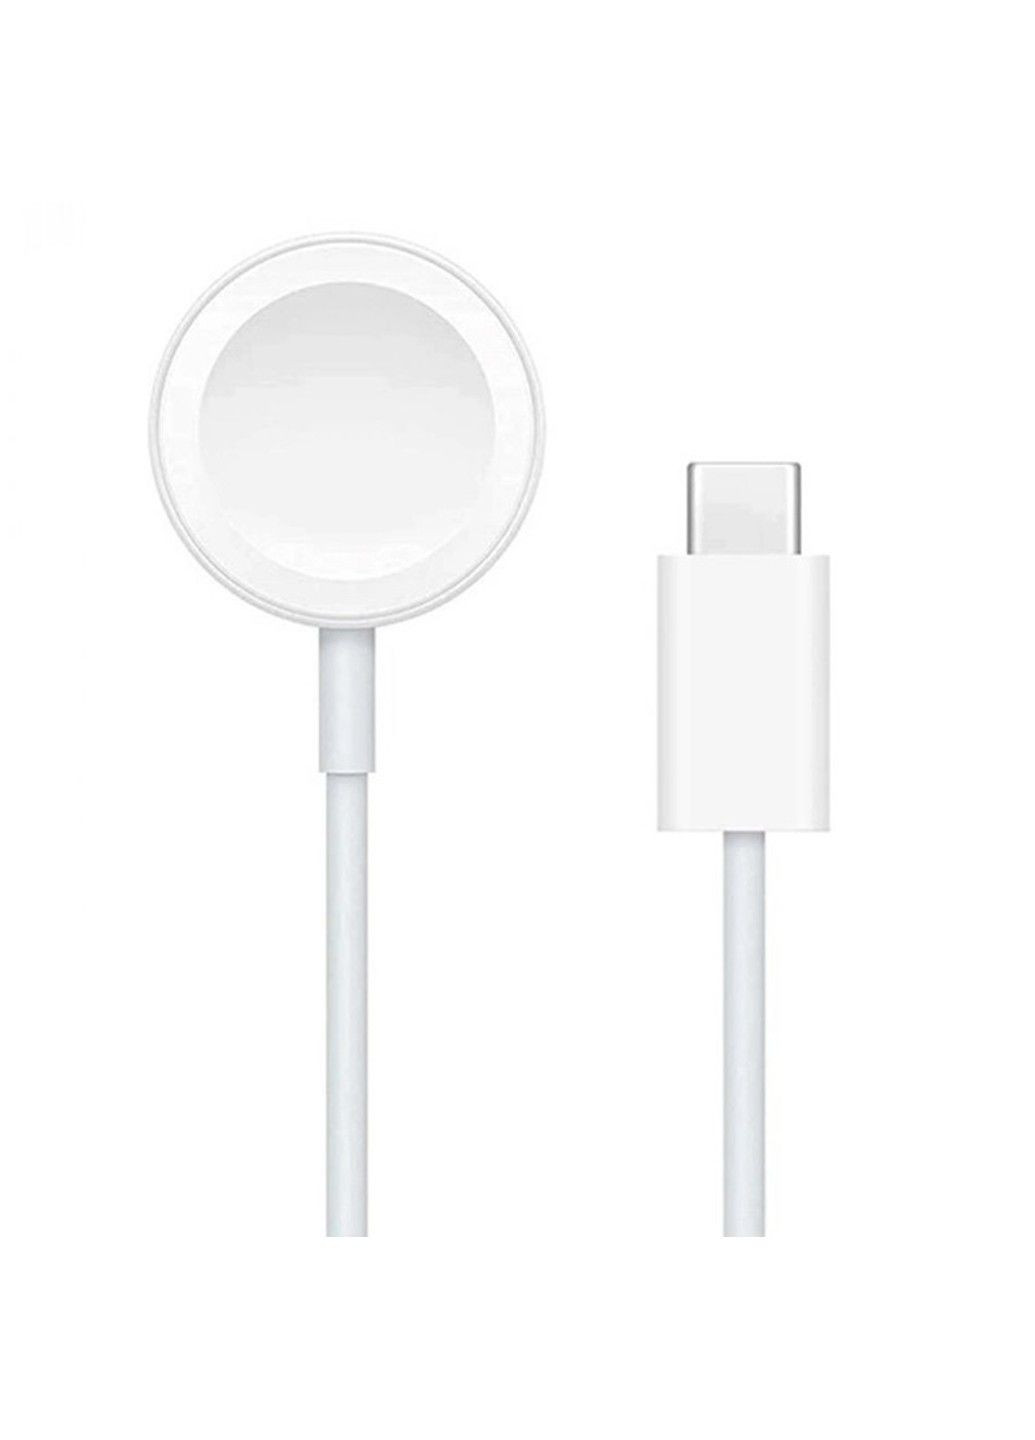 БЗП CW39C Wireless charger for iWatch (Type-C) Hoco (282627493)